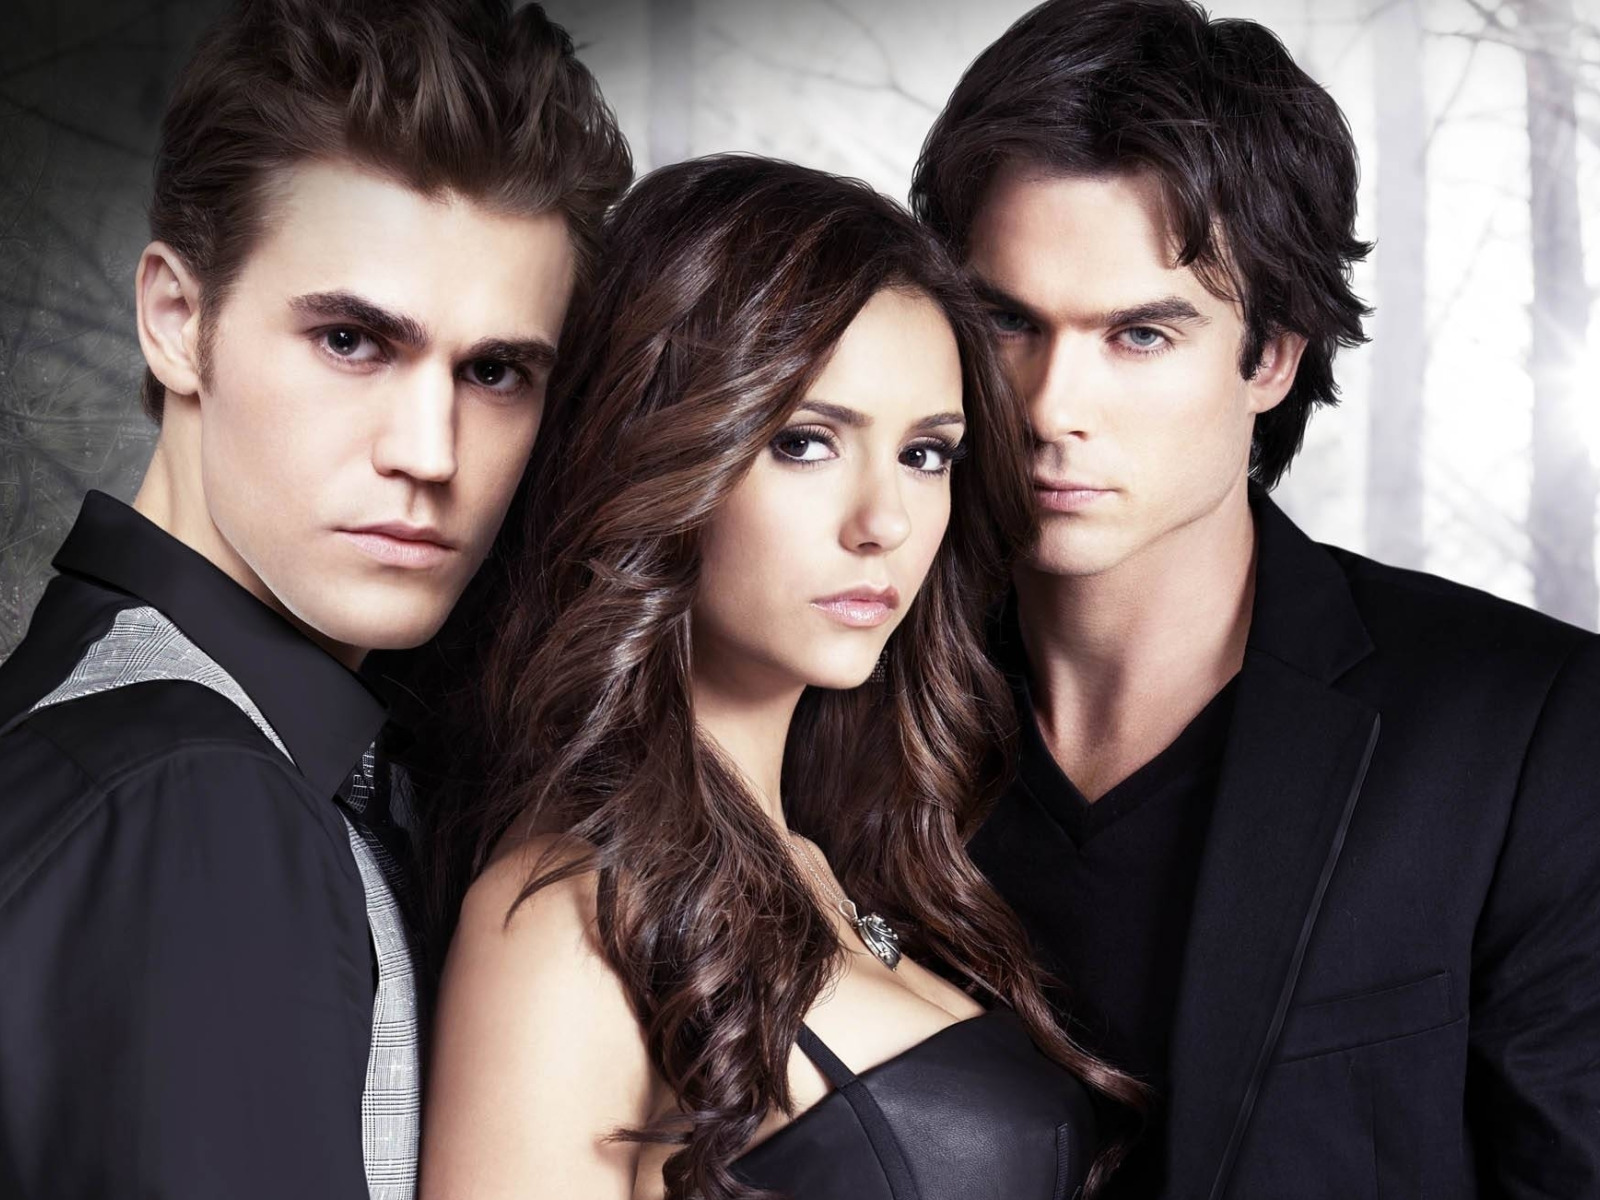 The vampire diaries in english. Дневники вампира вампиры.